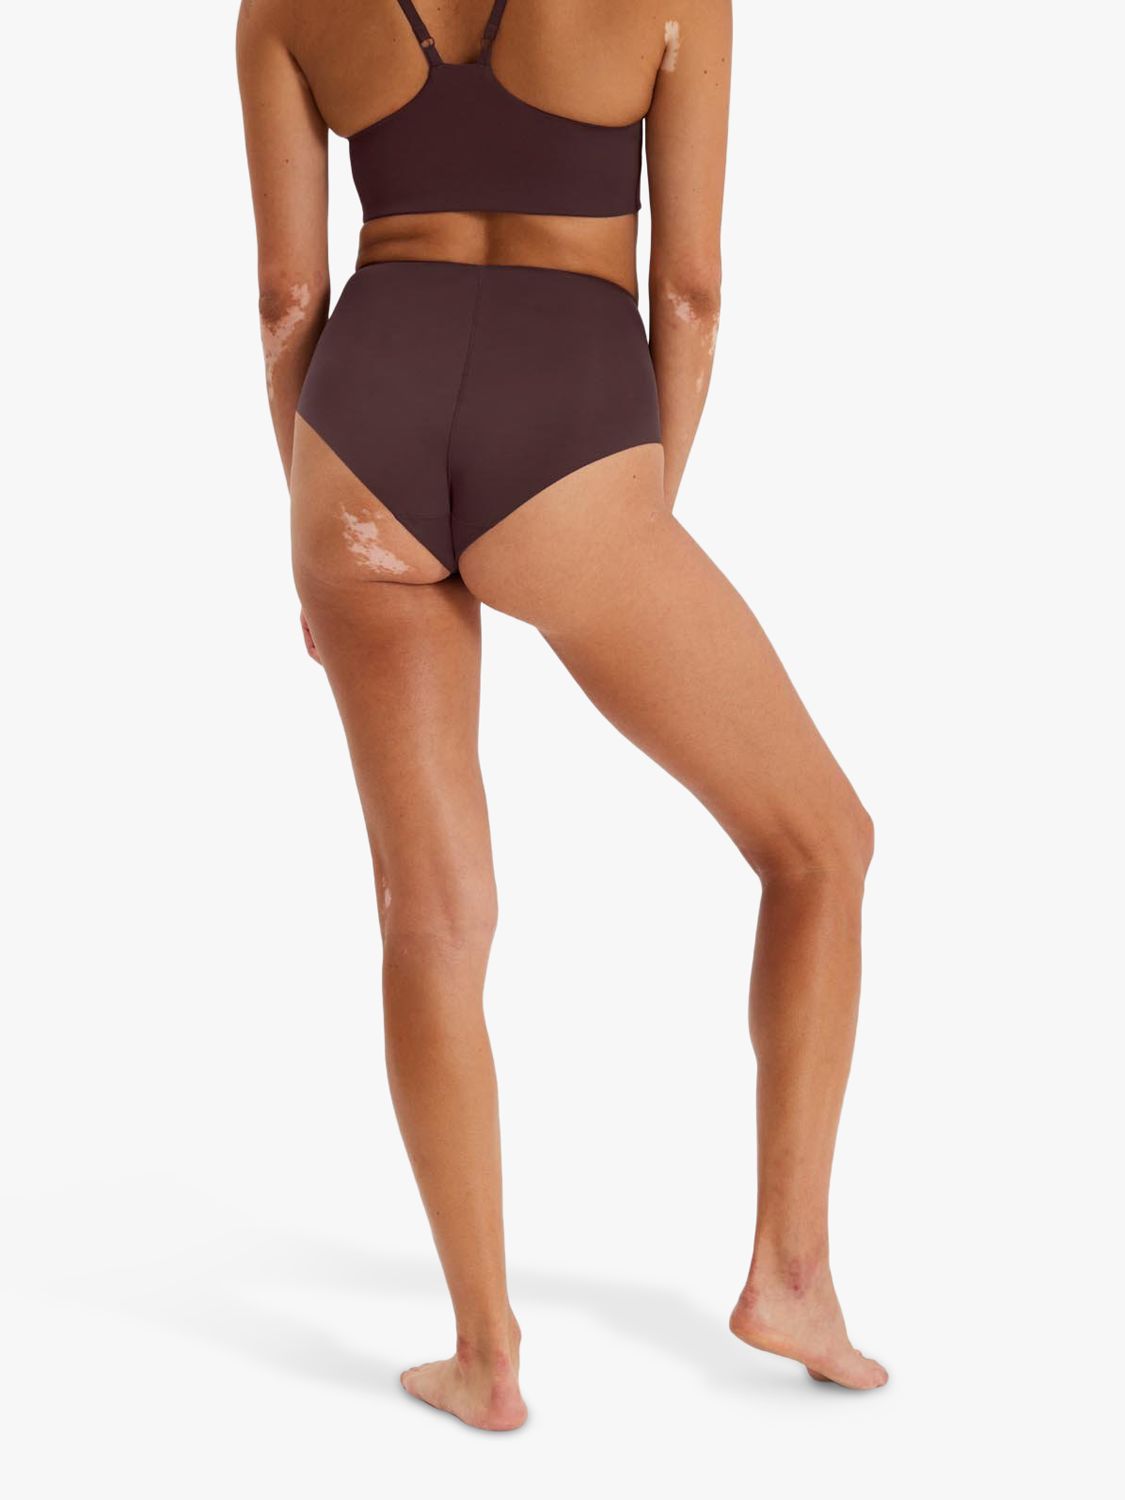 Girlfriend Collective High Rise Plain Sports Knickers, Espresso, XS